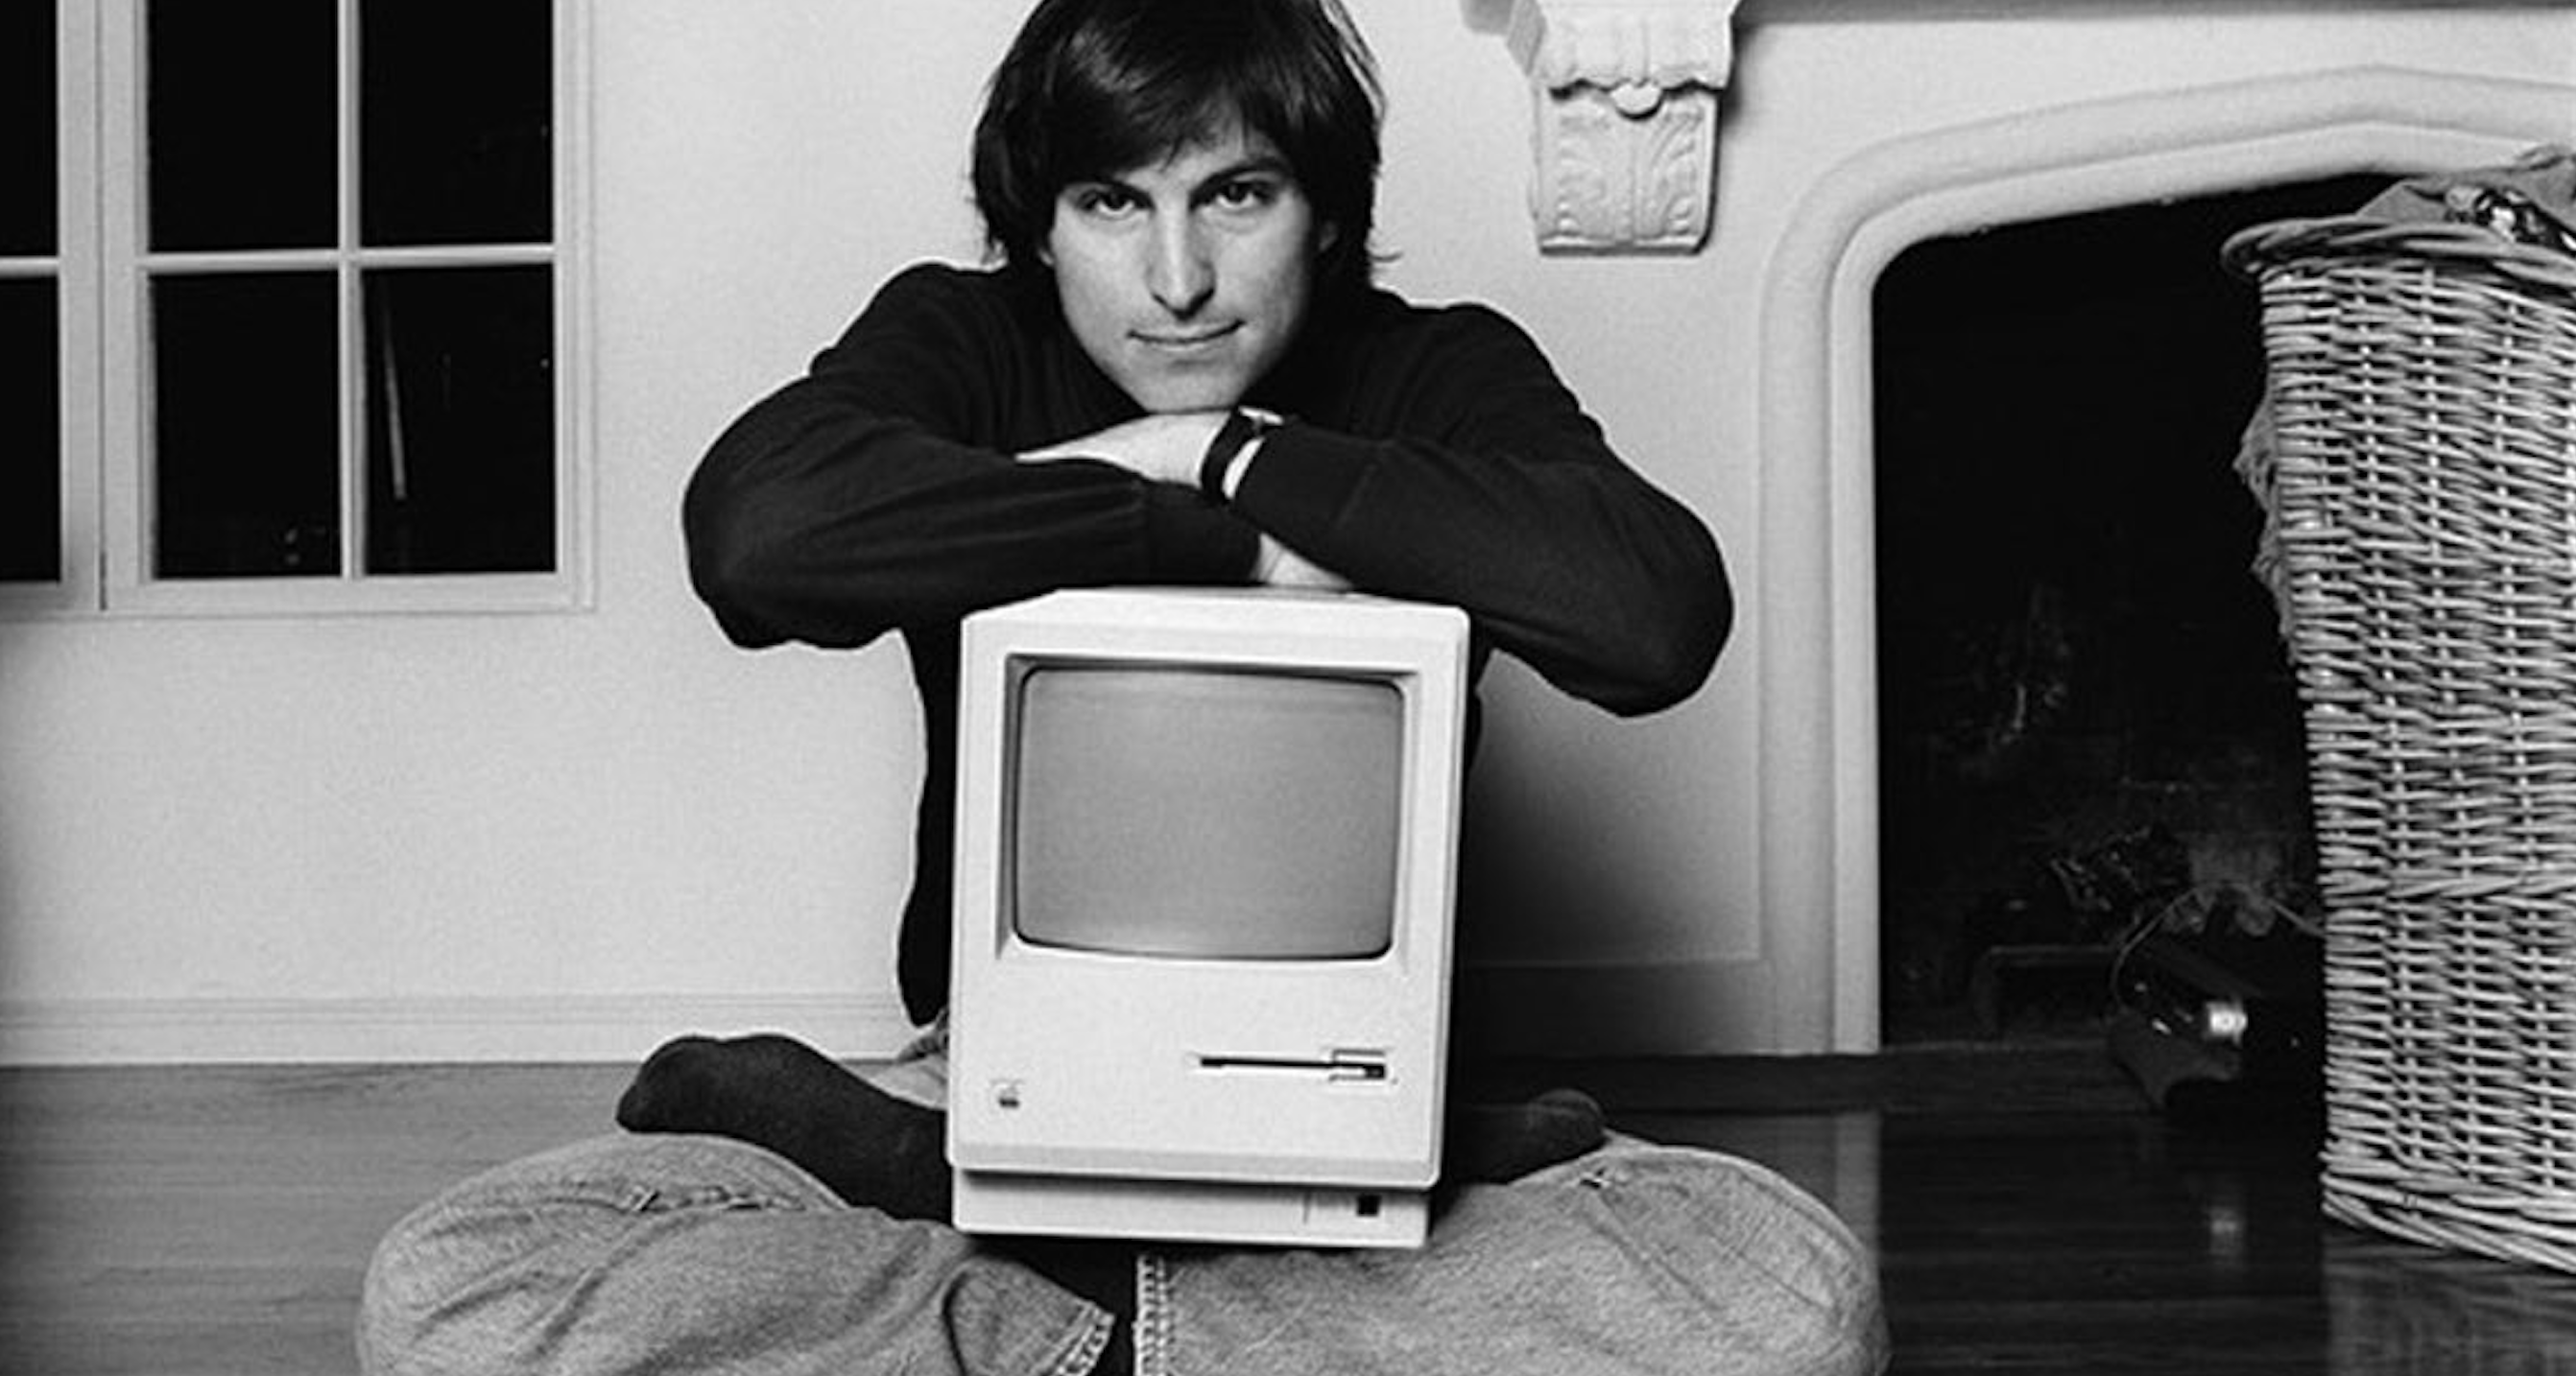 Seiko To Re Release The Watch Worn By Steve Jobs In One Of His Most Iconic Photos 9to5mac 